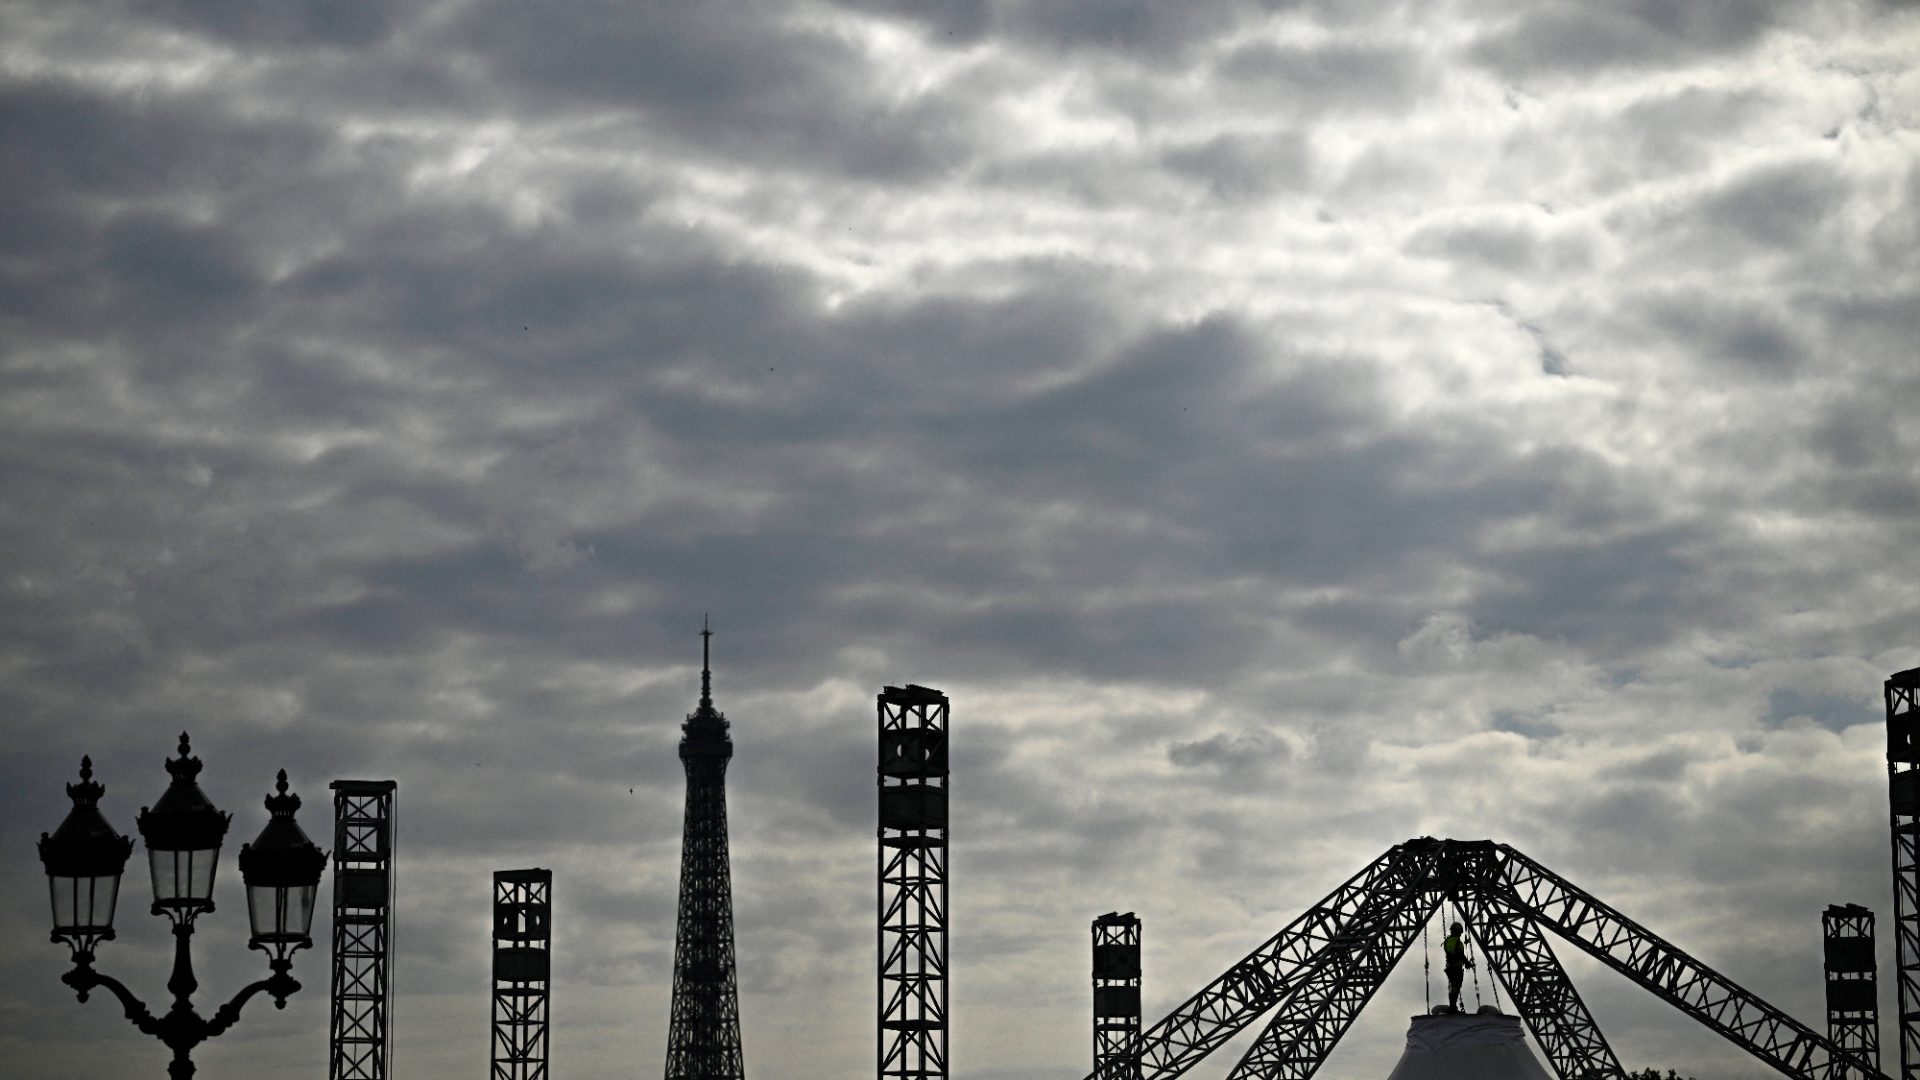 A worker sets up a marquee at the construction site of La Concorde Urban Parc for the Paris 2024 Olympics. Photo: Julien de Rosa/AFP/Getty